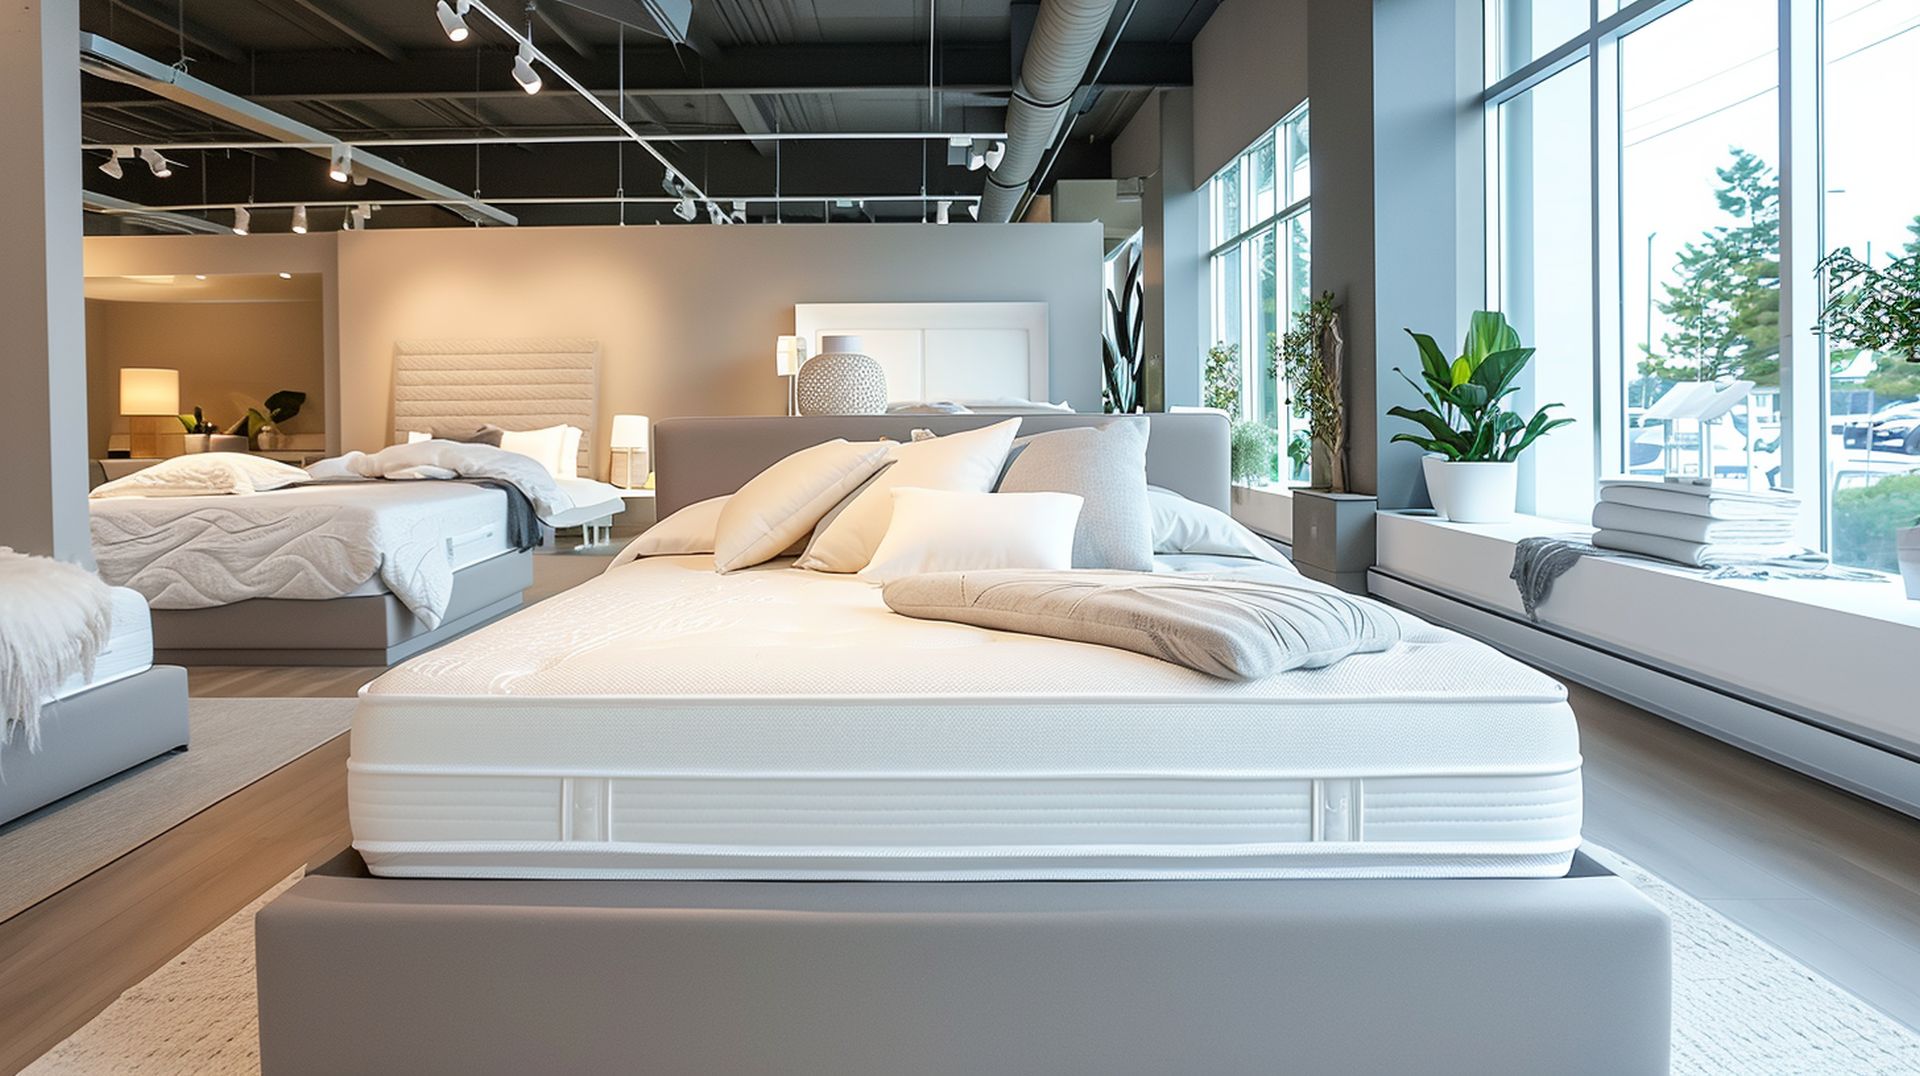 If you're looking for a new bed, mattress stores in Bethlehem offer the best customer and delivery service, financing, and warranties in Pennsylvania